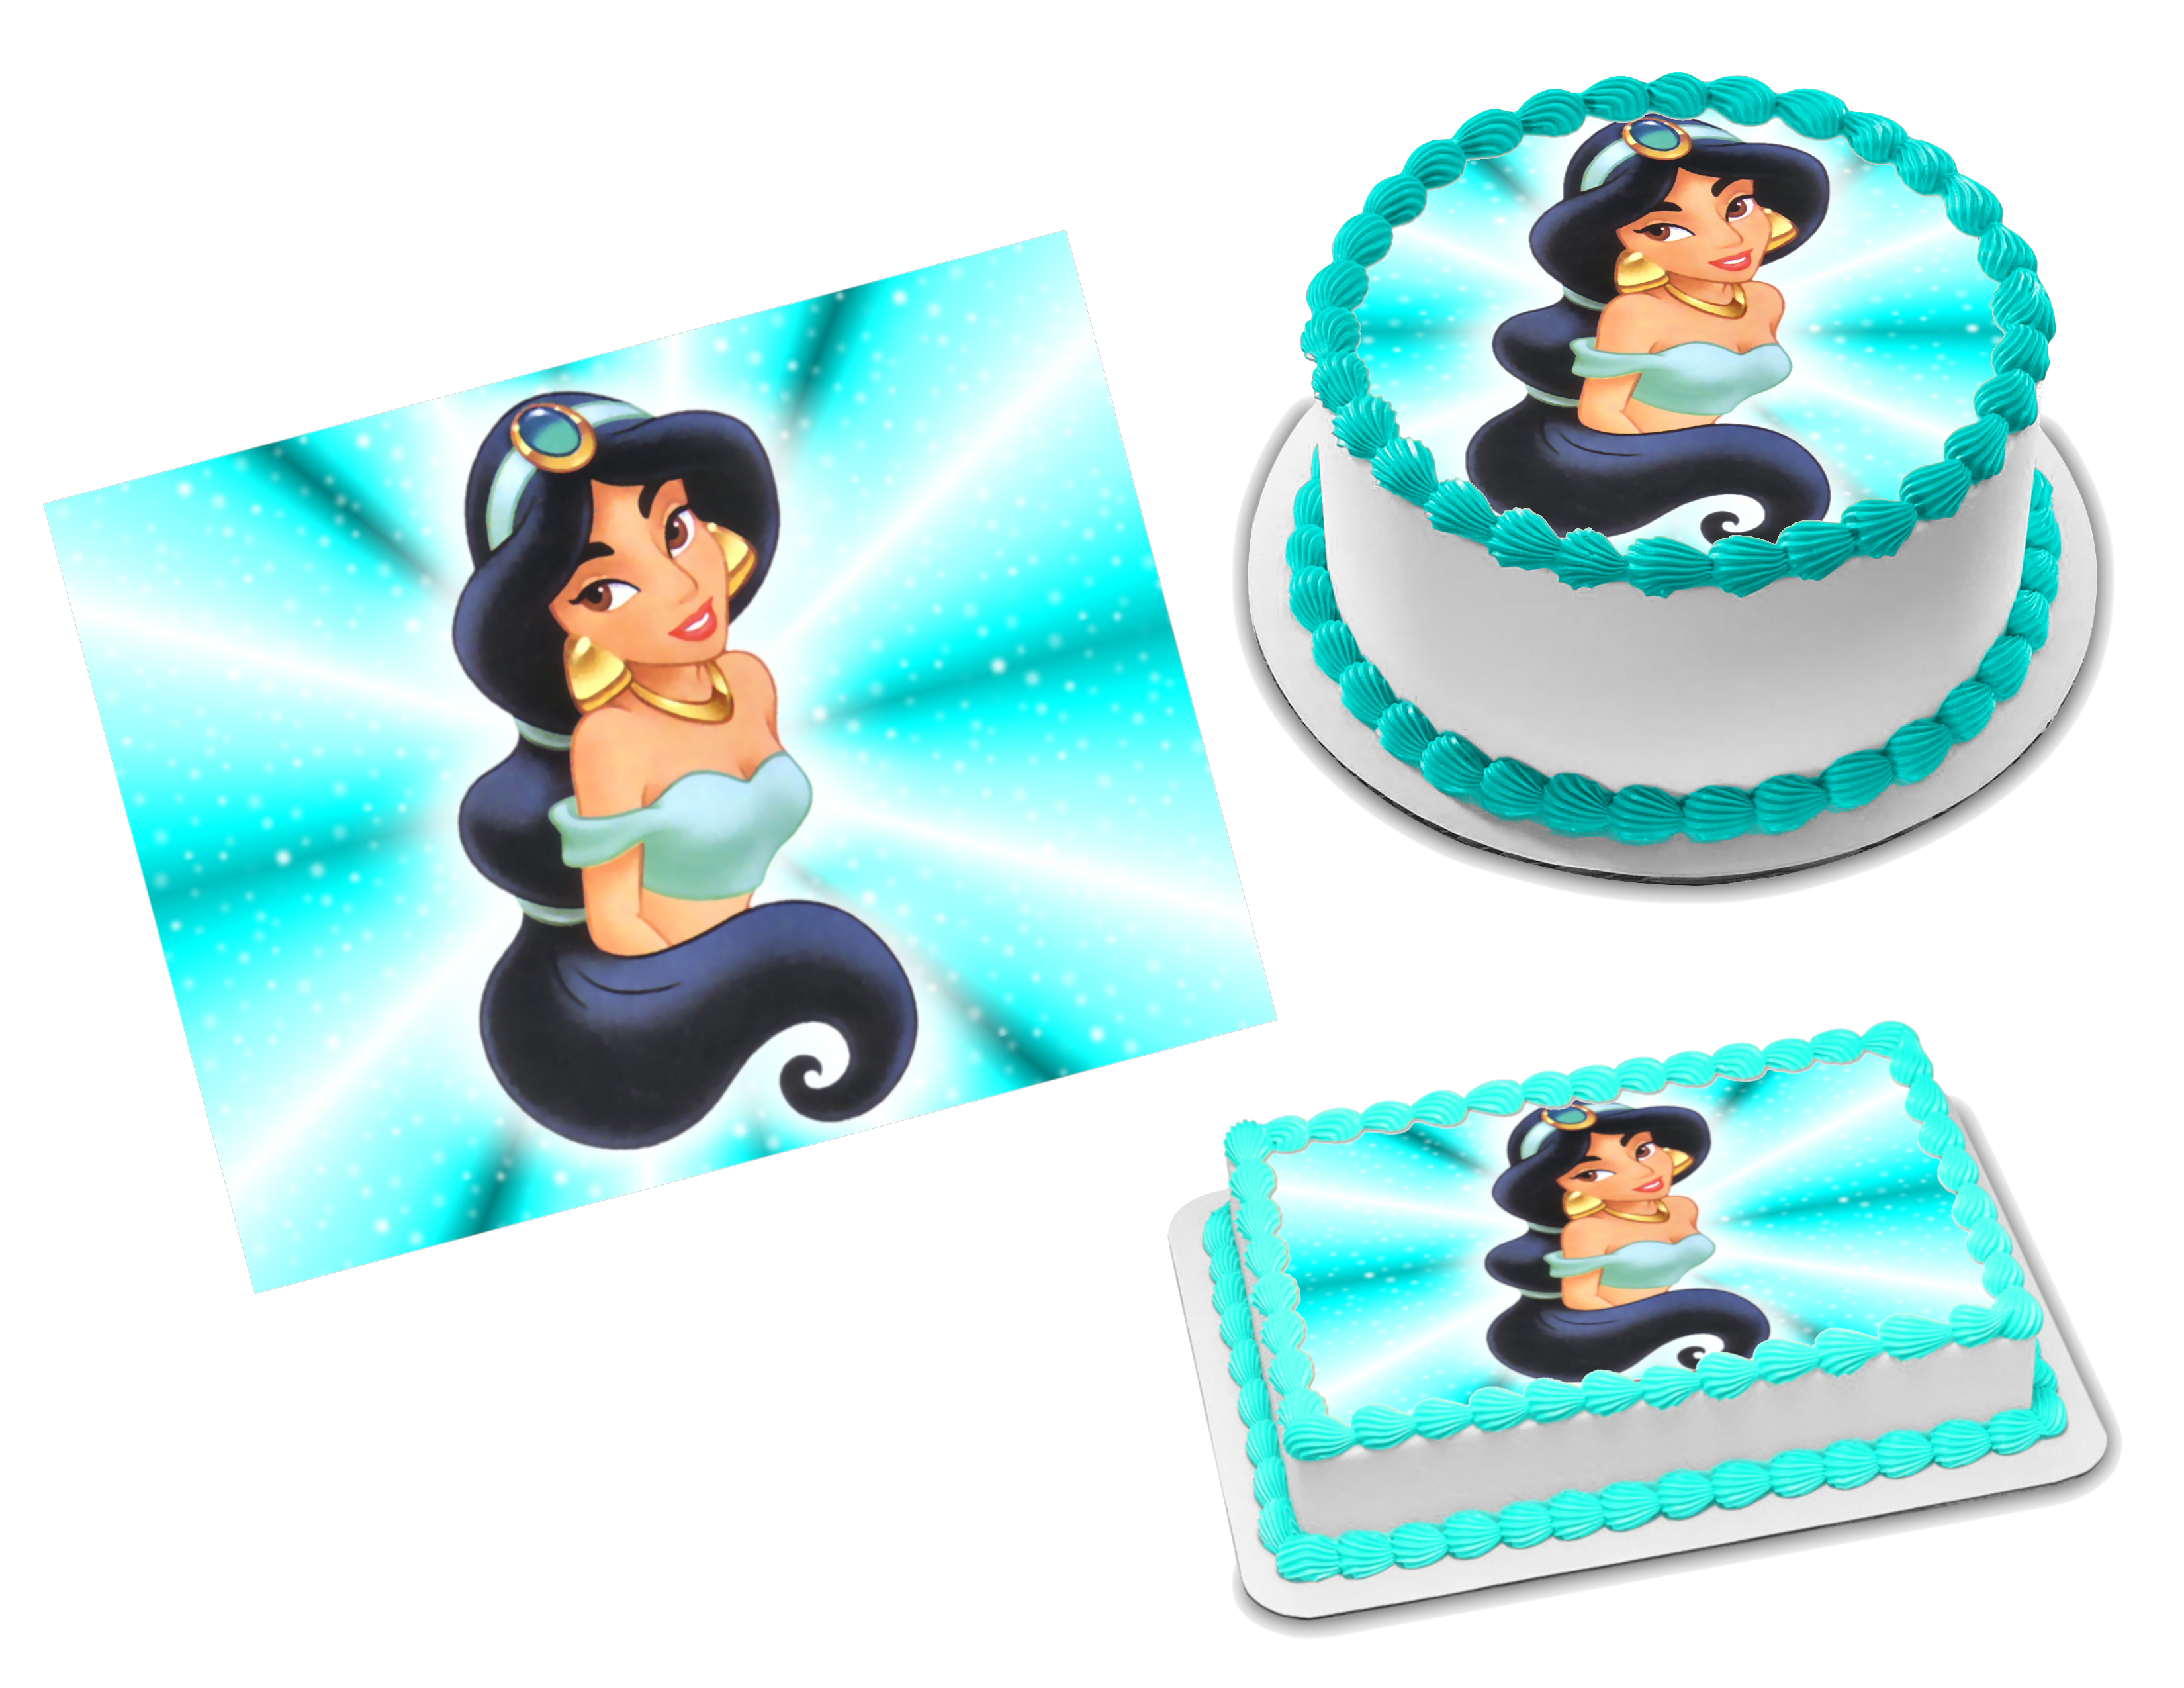 How to Make an Aladdin Birthday Cake and Cupcakes | Life in Stepping Stones